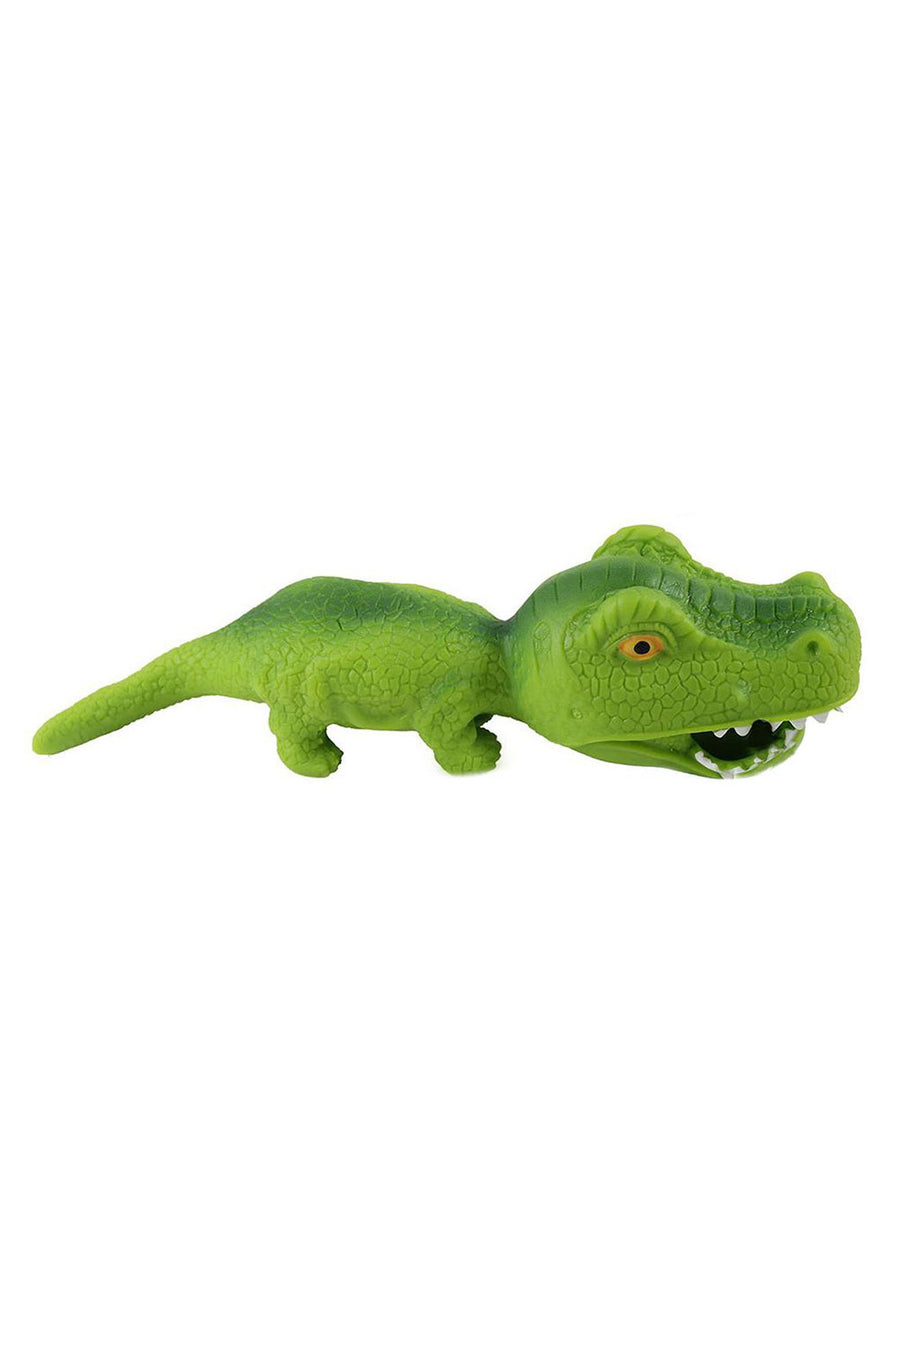 Sand Filled Squishy Alligator - Moldable Sensory, Stress, Squeeze Fidget - Vacay Land 